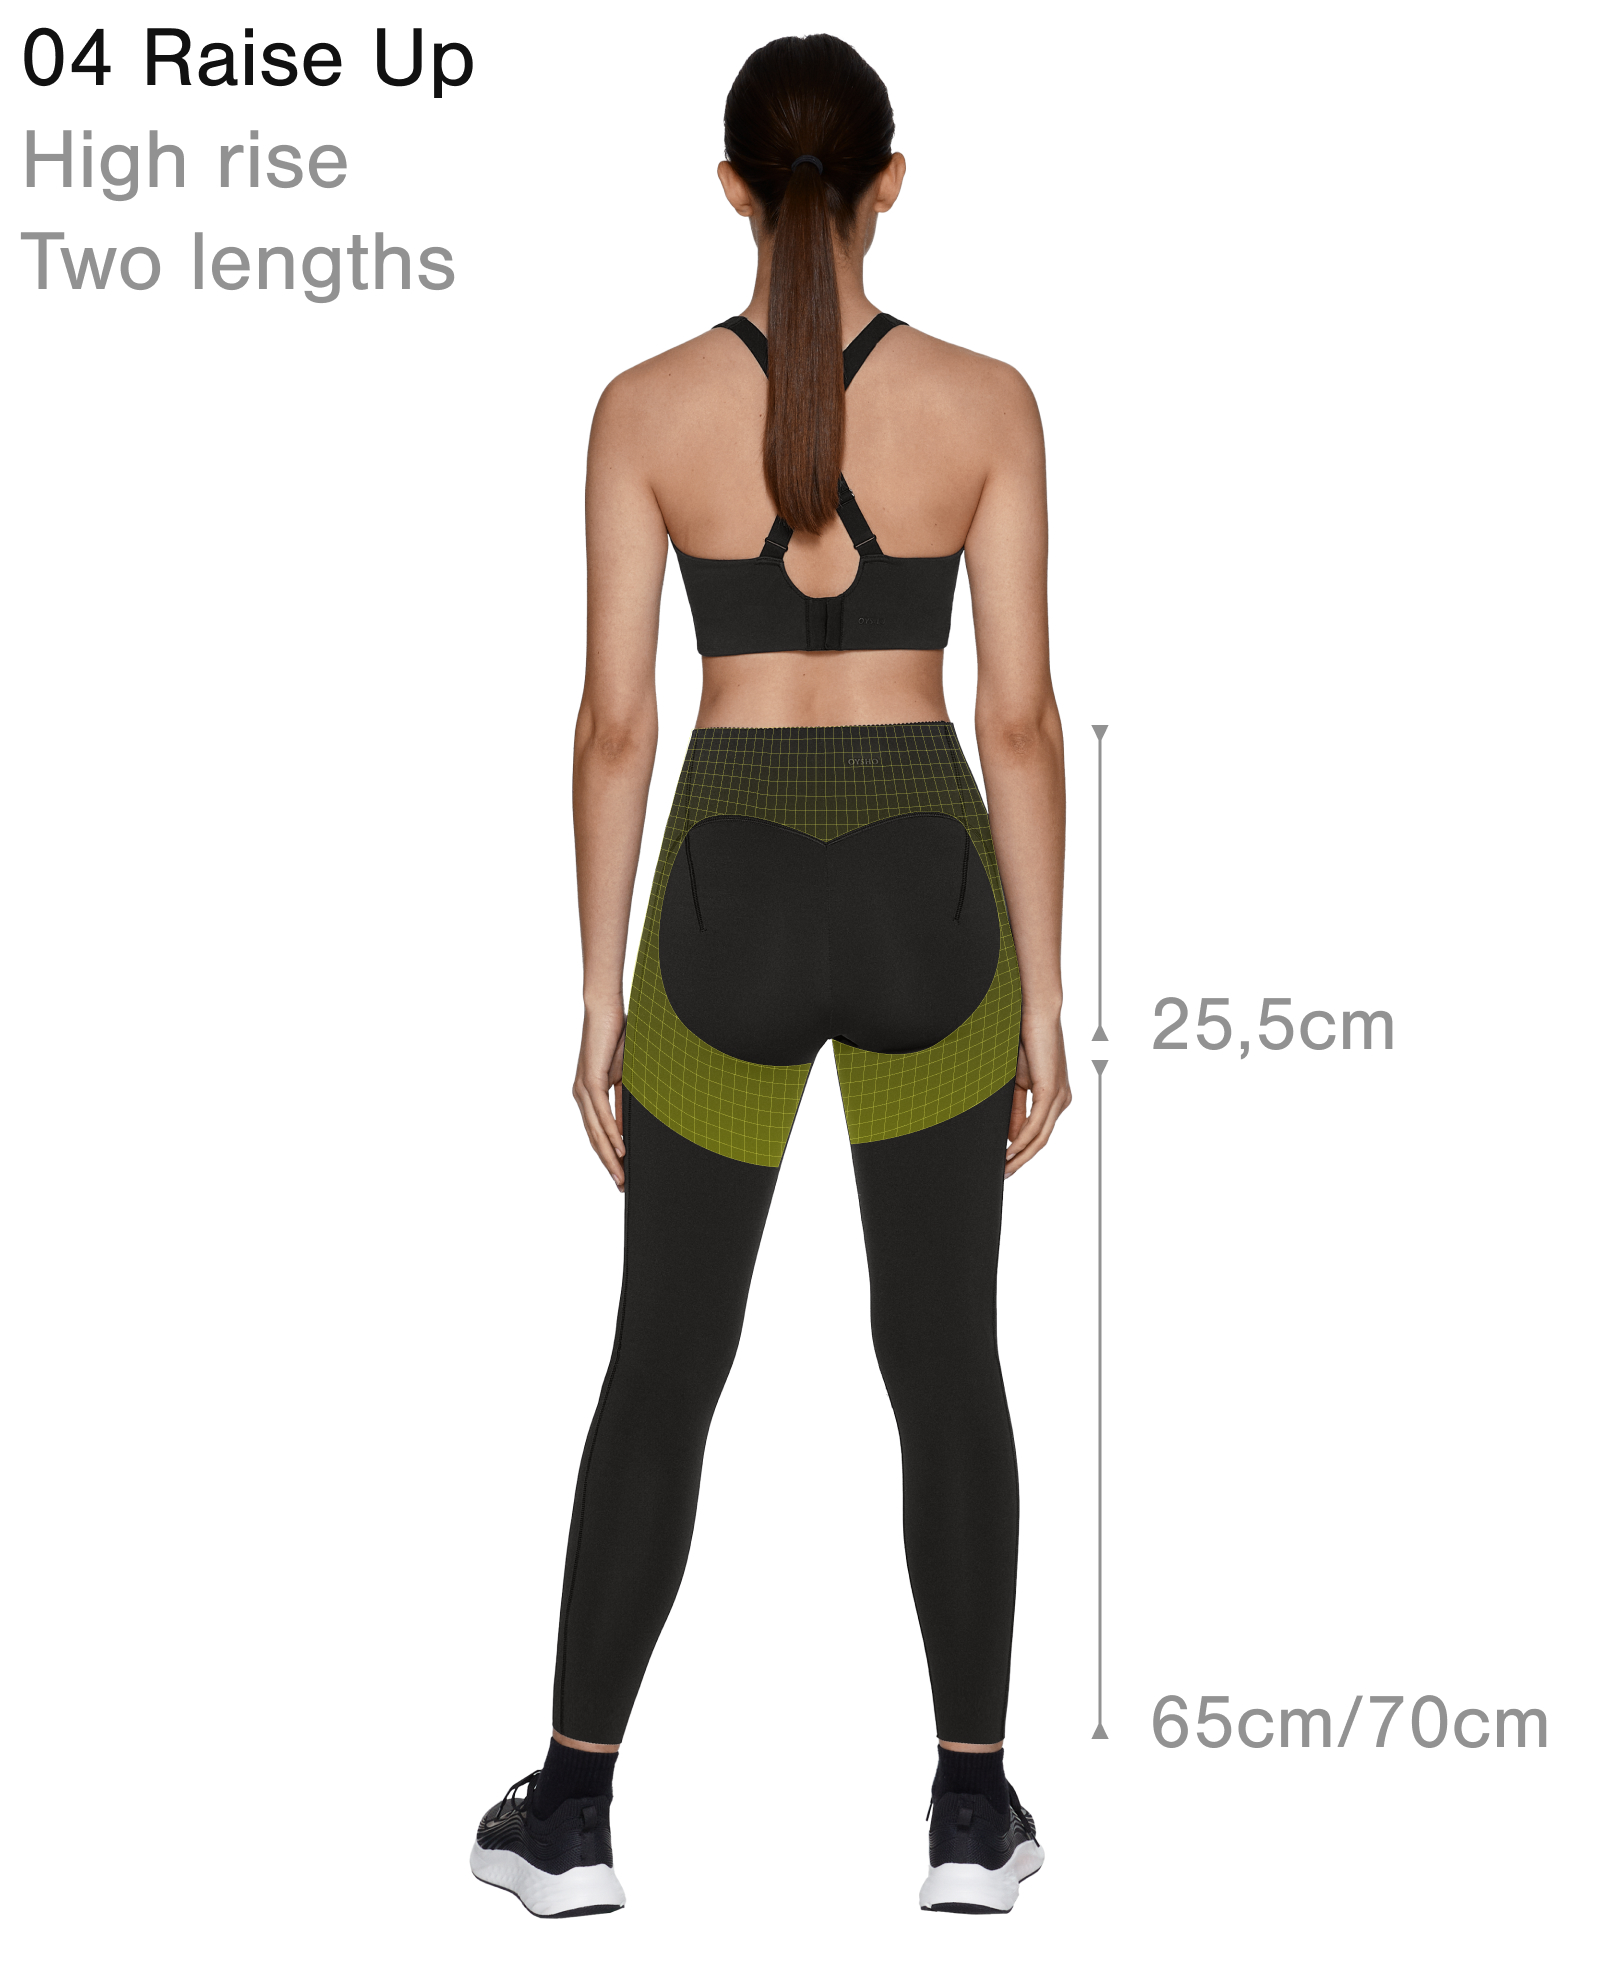 Oysho Leggings Size Guide  International Society of Precision Agriculture